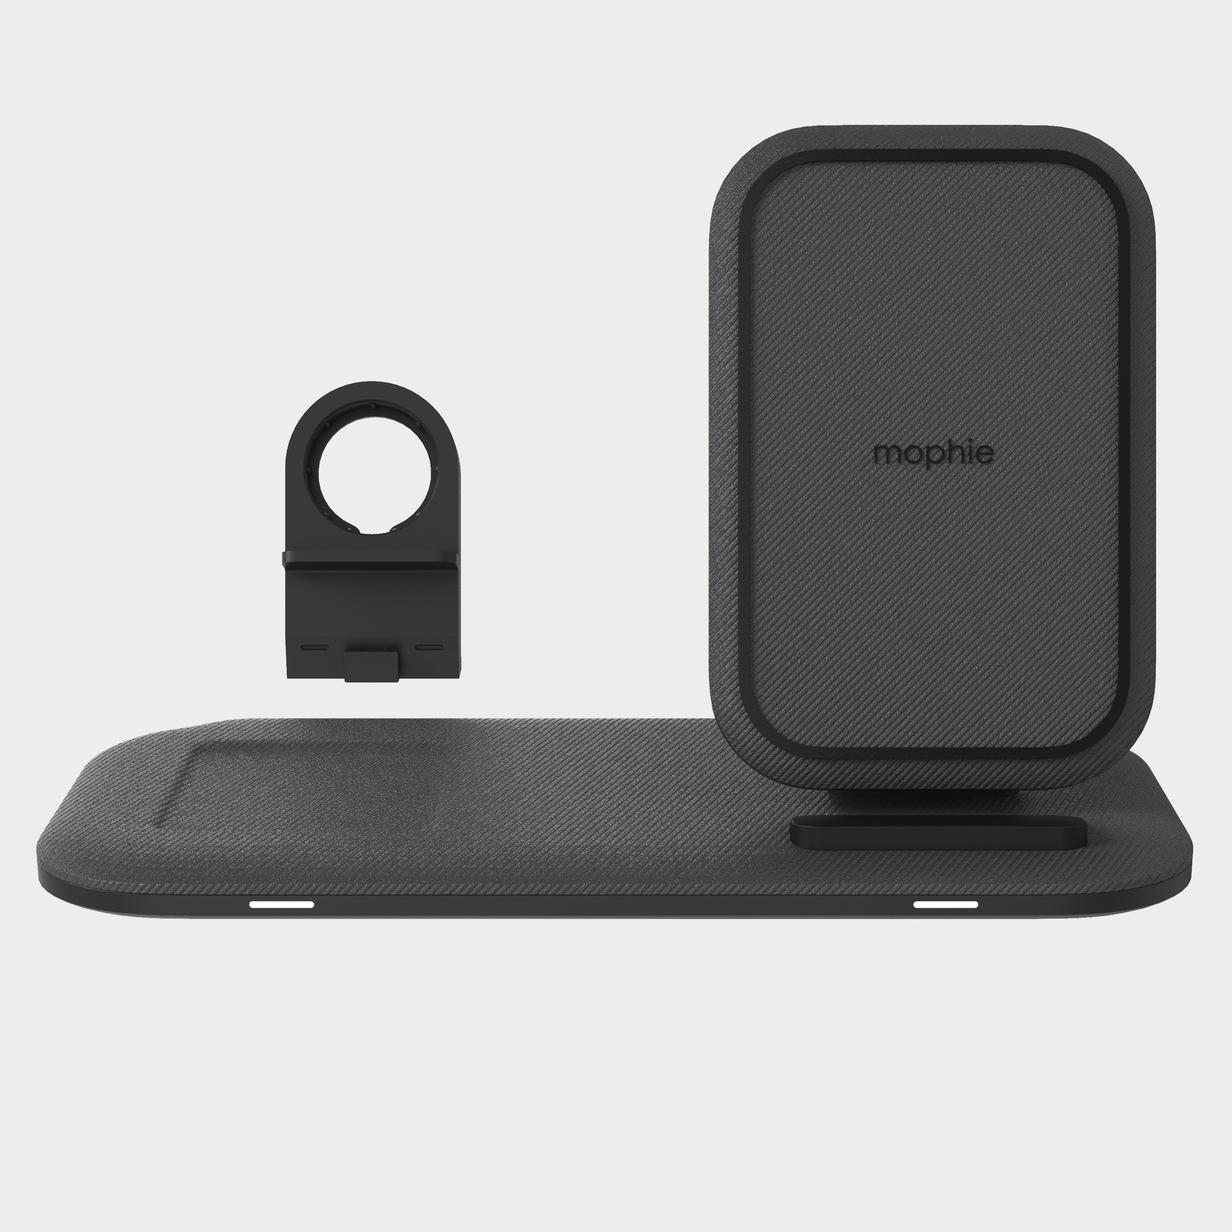 Moment mophie 401305840 Wireless Charging Stand Plus Pad 05